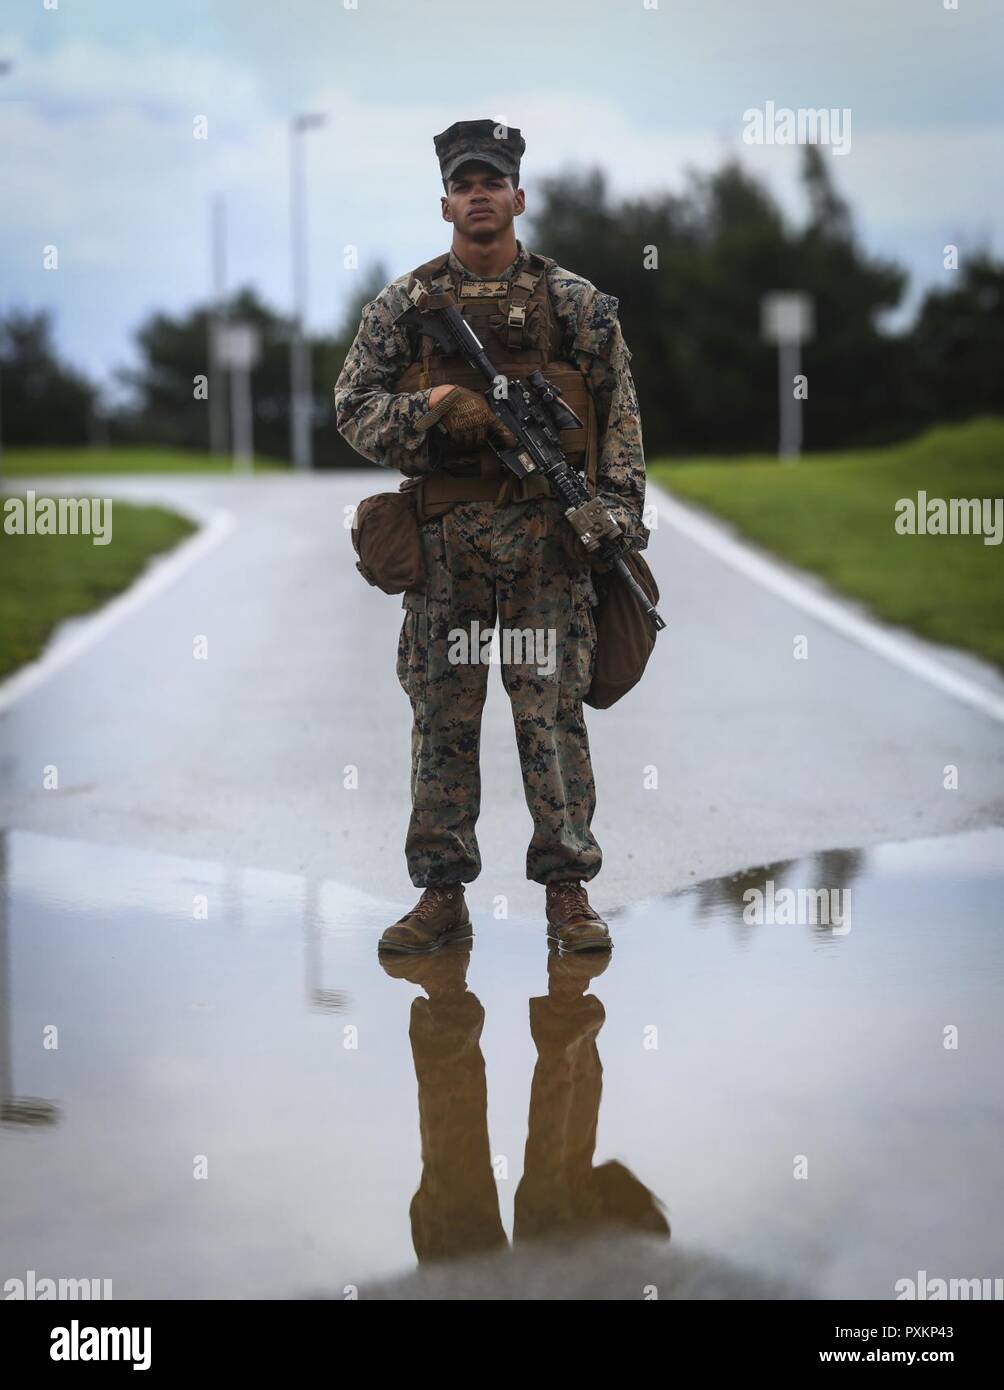 Lance Cpl. James J. Beck, a rifleman assigned to Alpha Company, 1st Battalion, 3rd Marine Regiment, poses for a portrait prior to conducting Battlesight Zero on his M4A1 carbine at Range 1 aboard Camp Hansen, Okinawa, Japan, June 14, 2017. The Hawaii-based battalion is forward deployed to Okinawa, Japan as part of the Unit Deployment Program. Stock Photo